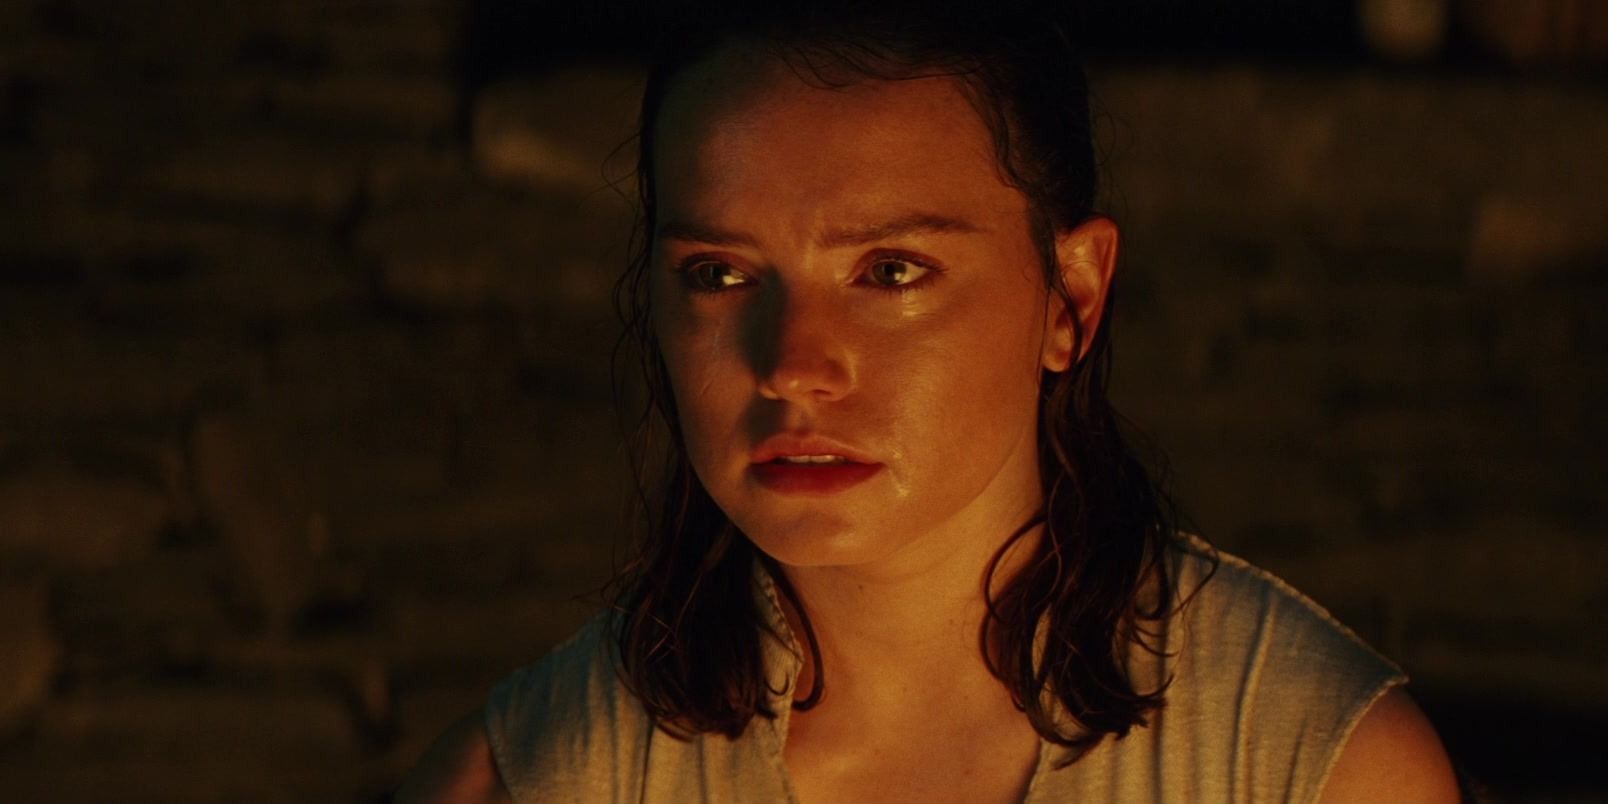 Rey looking upset with tears in her eyes in The Last Jedi